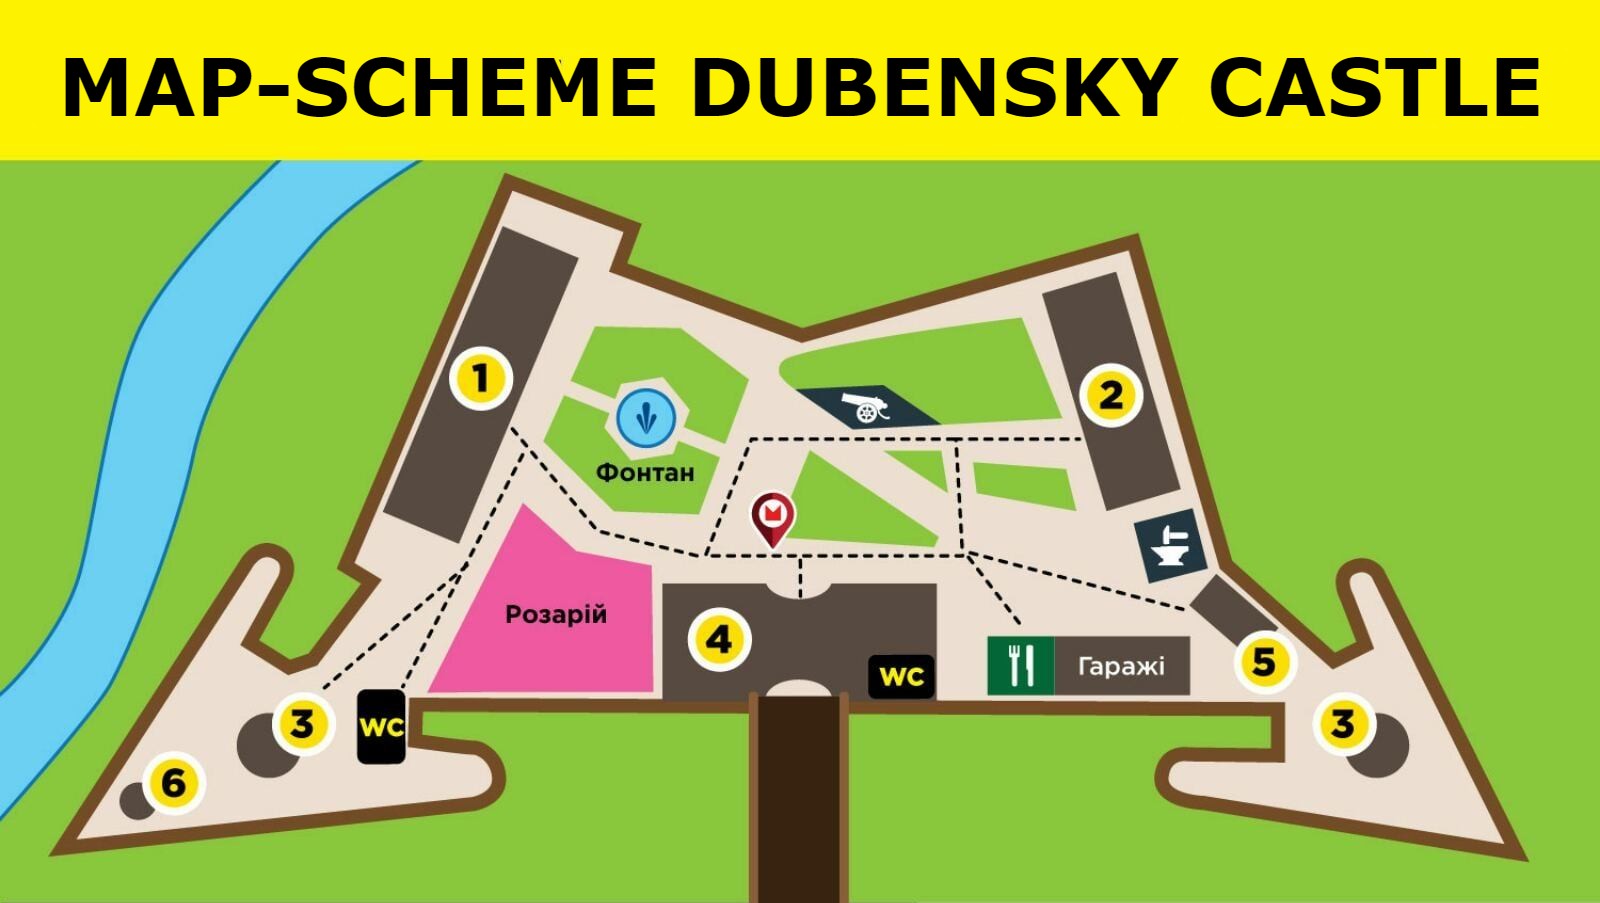 Scheme of the territory of Dubno Castle